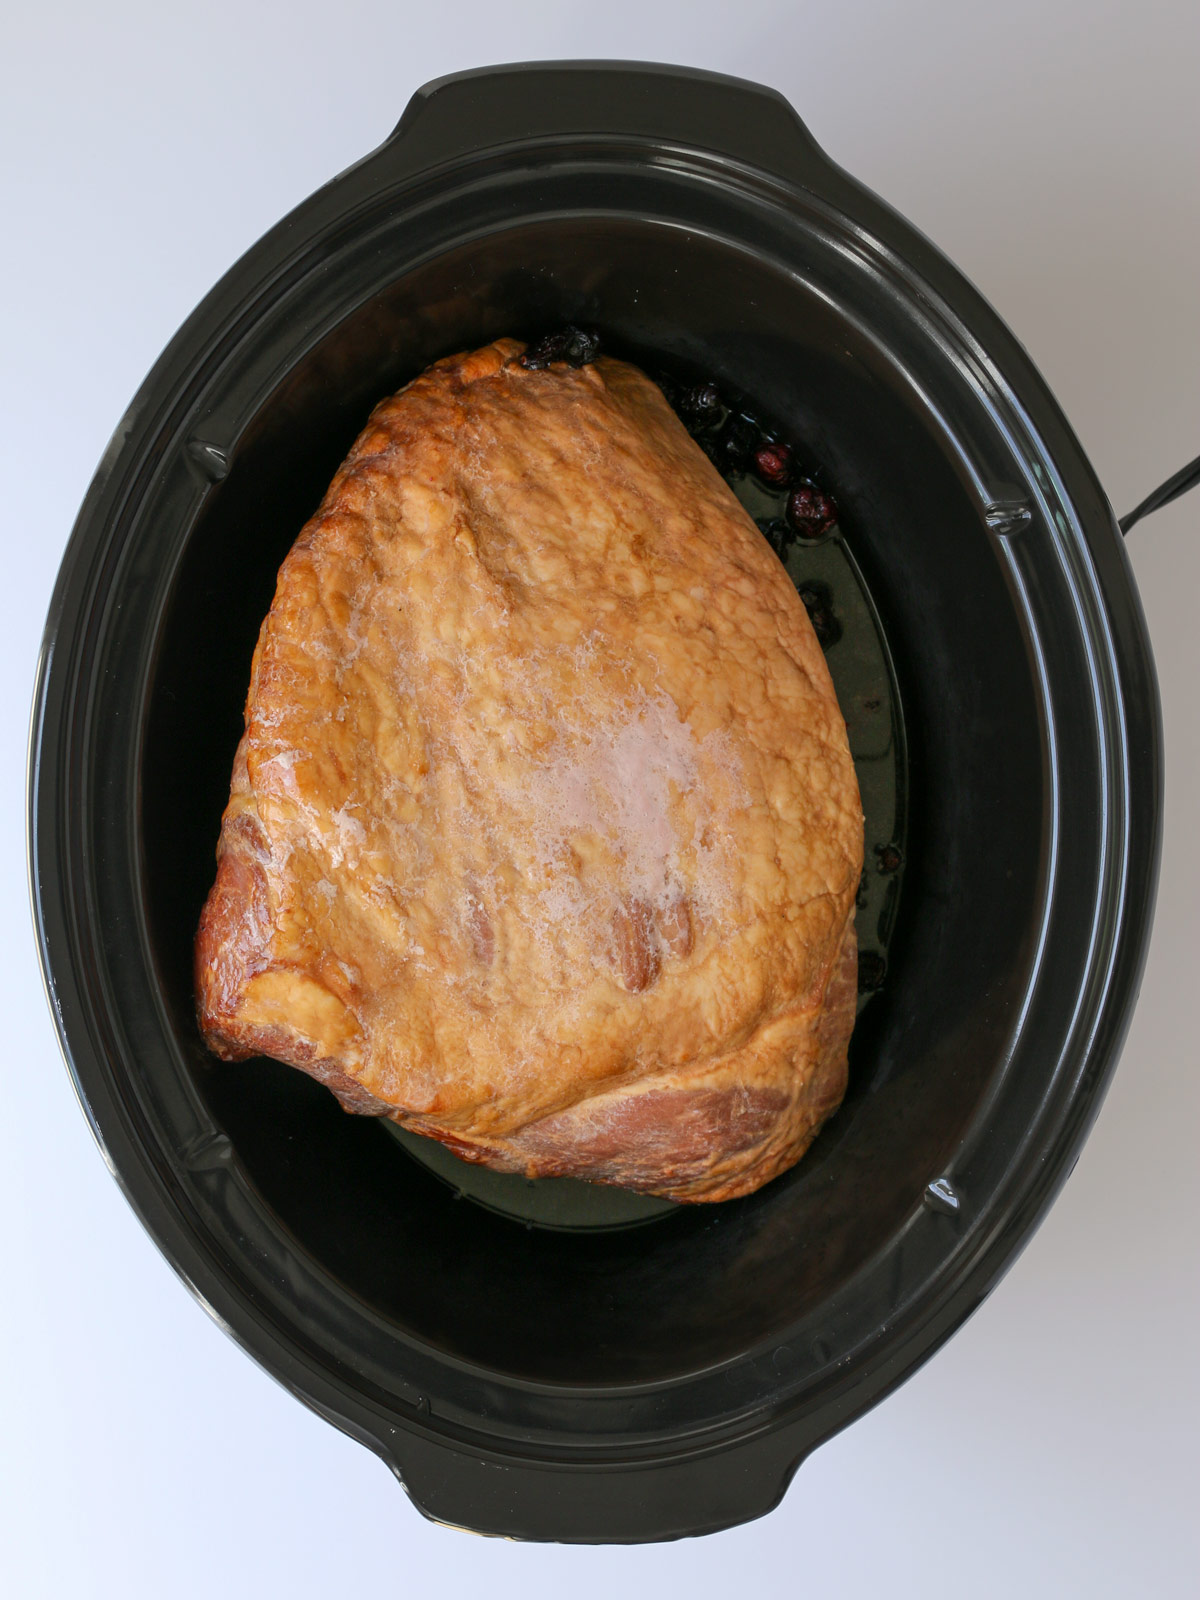 ham in crockpot after cooking.